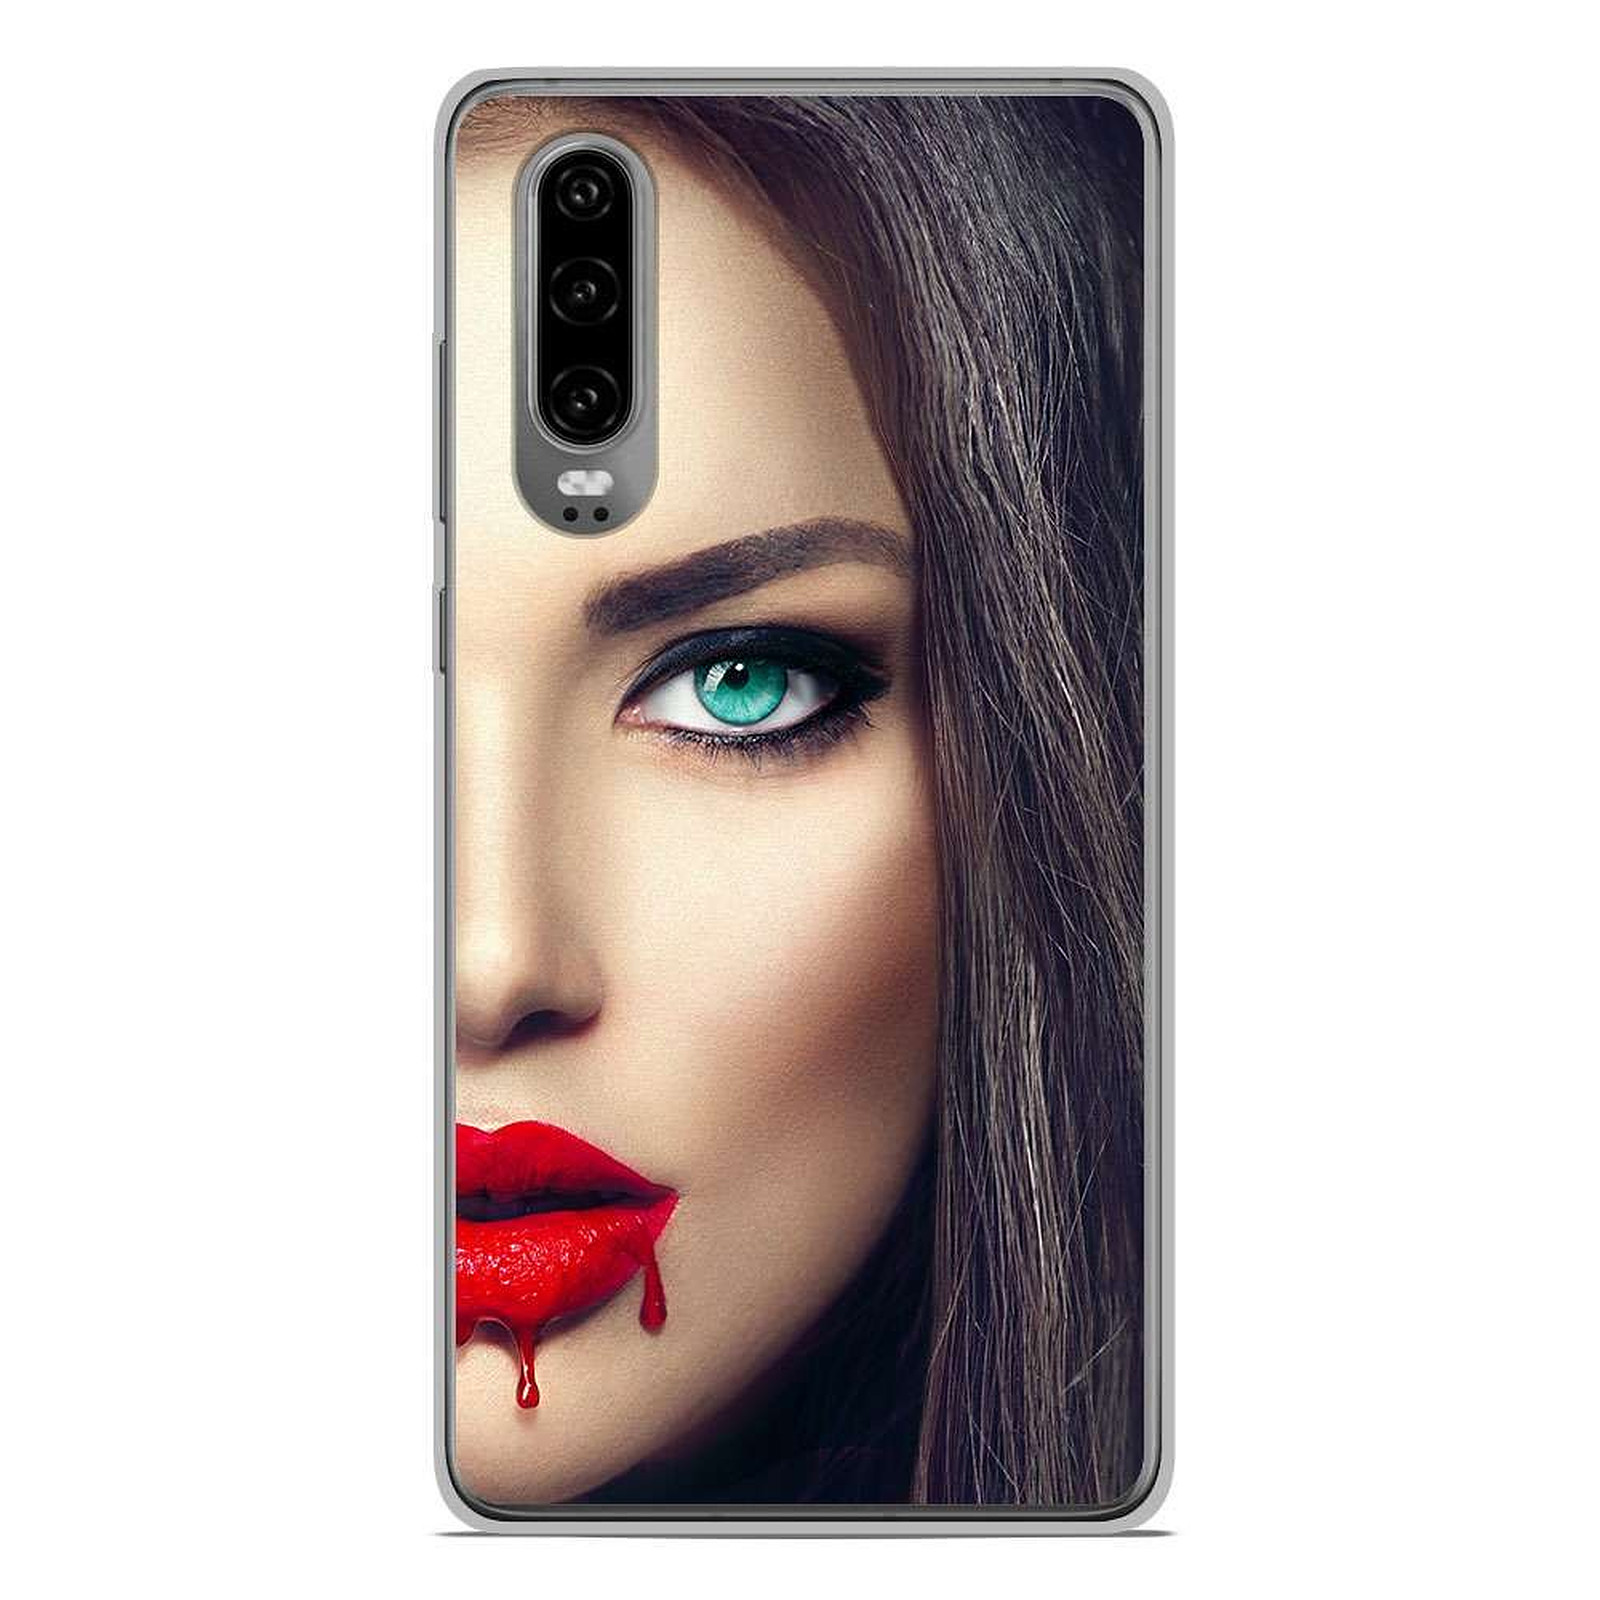 1001 Coques Coque silicone gel Huawei P30 motif Lèvres Sang - Coque telephone 1001Coques